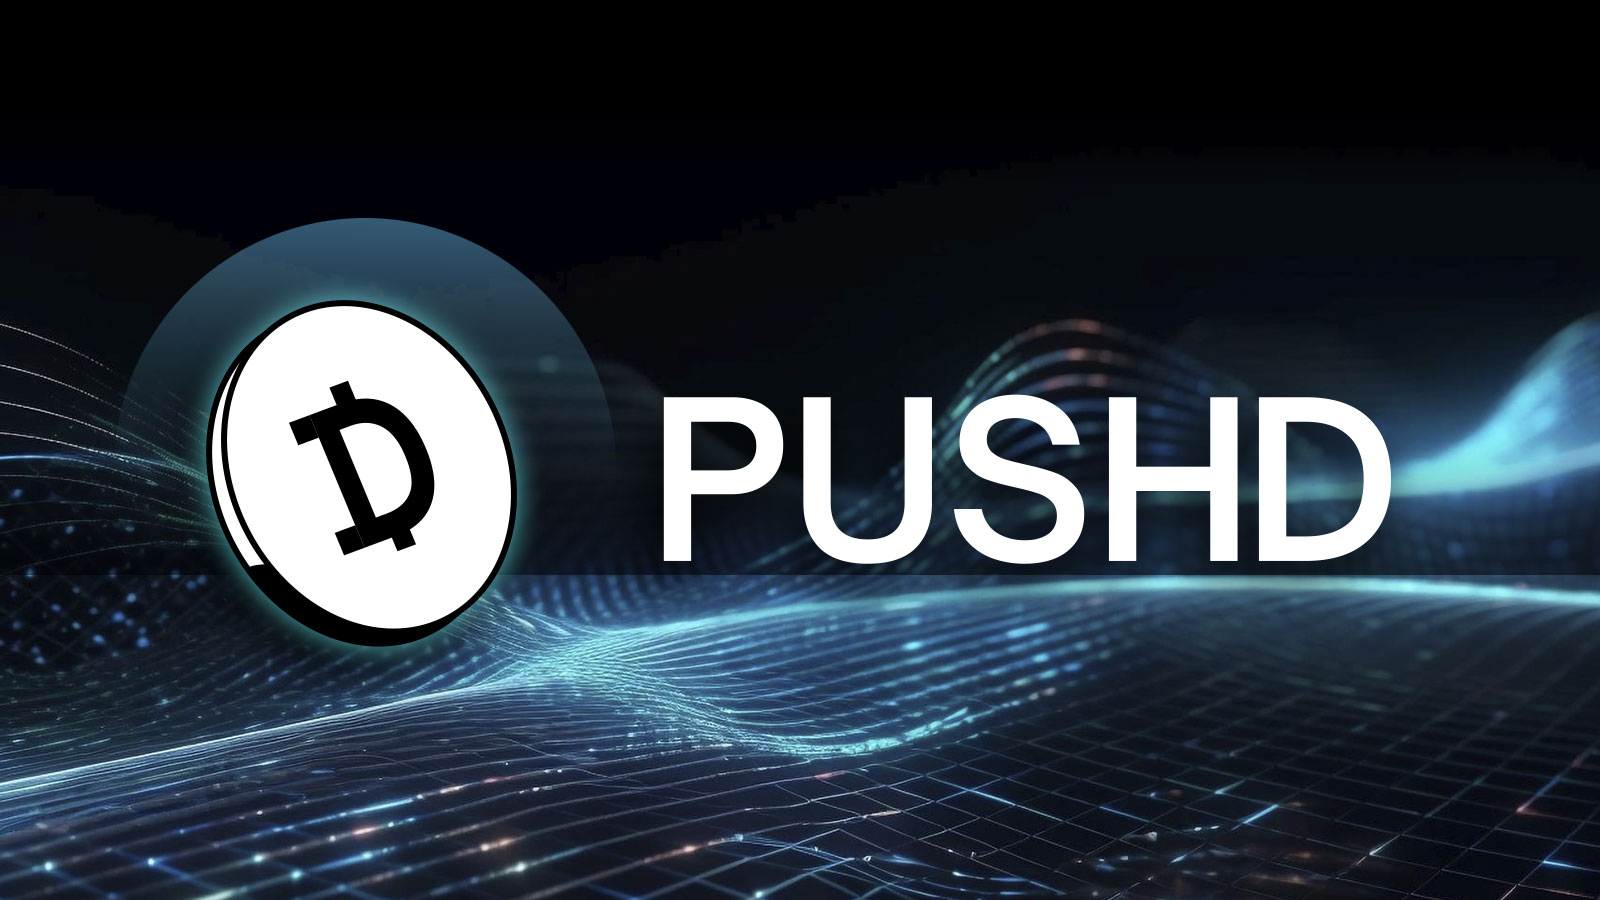 Pushd (PUSHD) Pre-Sale Right Now is Gaining Attention in February as Solana (SOL) and Binance Coin (BNB) Majors Recovering